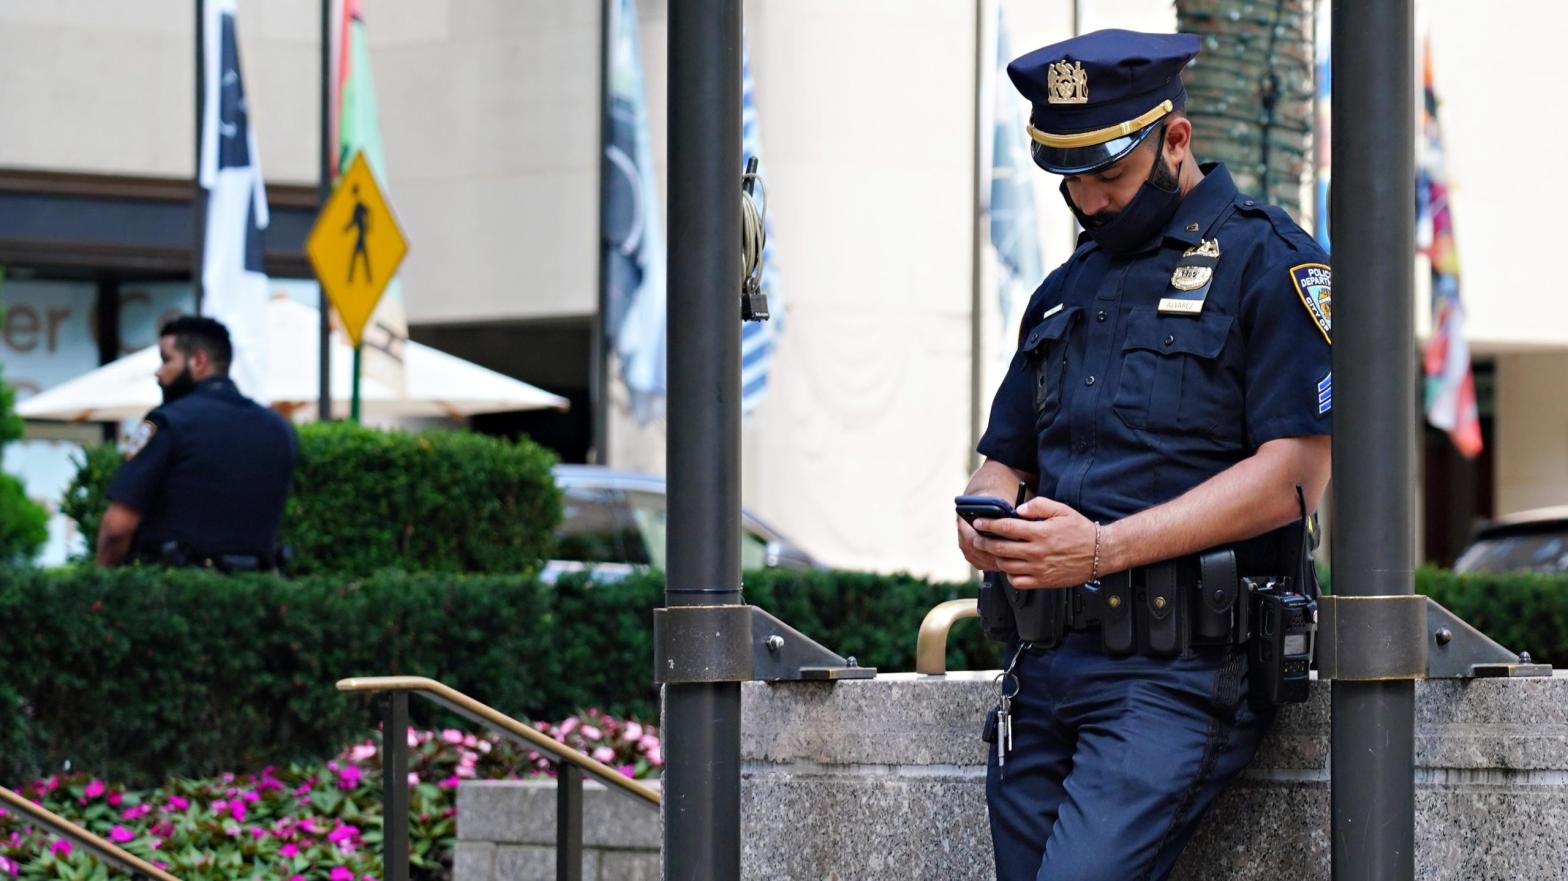 Officer chin-mask phones a friend. (Photo: Cindy Ord, Getty Images)